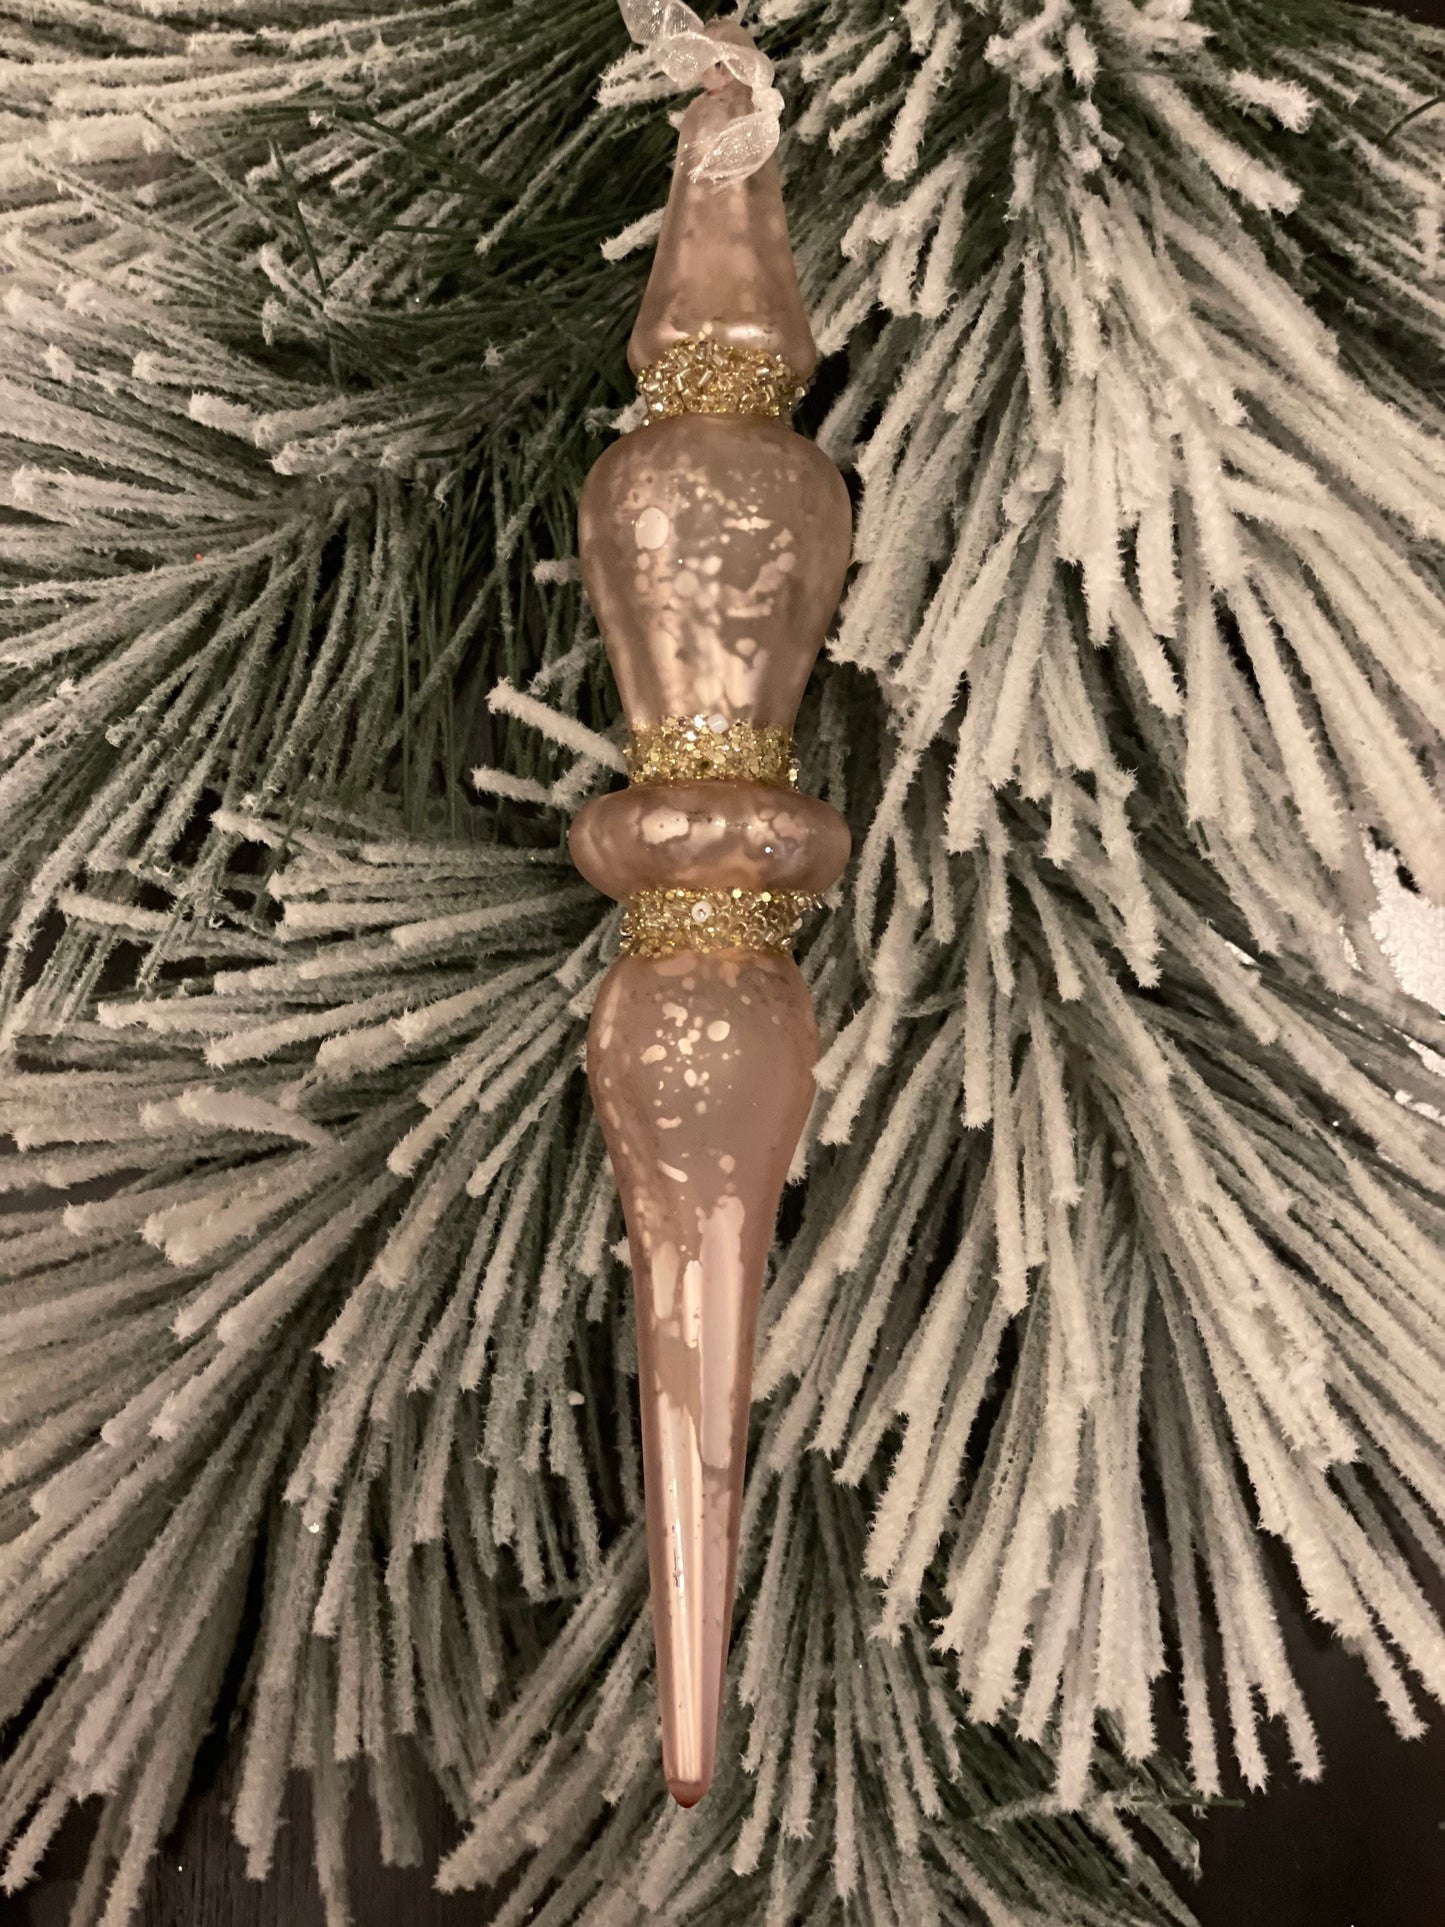 10" Glass finial ornament. Soft pink and gold. Mercury glass. Set of 2.